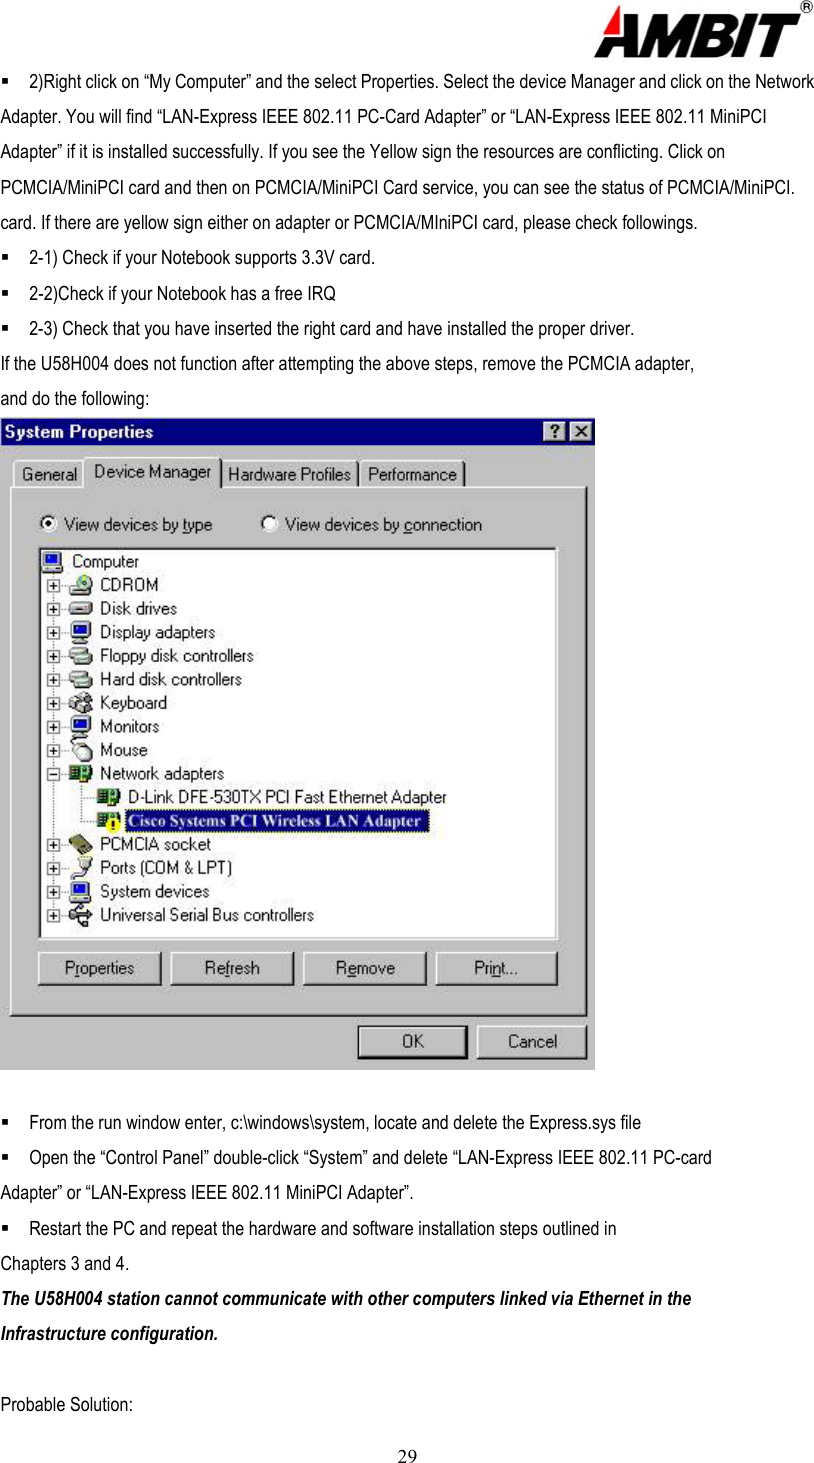  29  2)Right click on “My Computer” and the select Properties. Select the device Manager and click on the Network Adapter. You will find “LAN-Express IEEE 802.11 PC-Card Adapter” or “LAN-Express IEEE 802.11 MiniPCI Adapter” if it is installed successfully. If you see the Yellow sign the resources are conflicting. Click on PCMCIA/MiniPCI card and then on PCMCIA/MiniPCI Card service, you can see the status of PCMCIA/MiniPCI. card. If there are yellow sign either on adapter or PCMCIA/MIniPCI card, please check followings.  2-1) Check if your Notebook supports 3.3V card.  2-2)Check if your Notebook has a free IRQ  2-3) Check that you have inserted the right card and have installed the proper driver. If the U58H004 does not function after attempting the above steps, remove the PCMCIA adapter, and do the following:   From the run window enter, c:\windows\system, locate and delete the Express.sys file  Open the “Control Panel” double-click “System” and delete “LAN-Express IEEE 802.11 PC-card Adapter” or “LAN-Express IEEE 802.11 MiniPCI Adapter”.  Restart the PC and repeat the hardware and software installation steps outlined in Chapters 3 and 4. The U58H004 station cannot communicate with other computers linked via Ethernet in the Infrastructure configuration.  Probable Solution: 